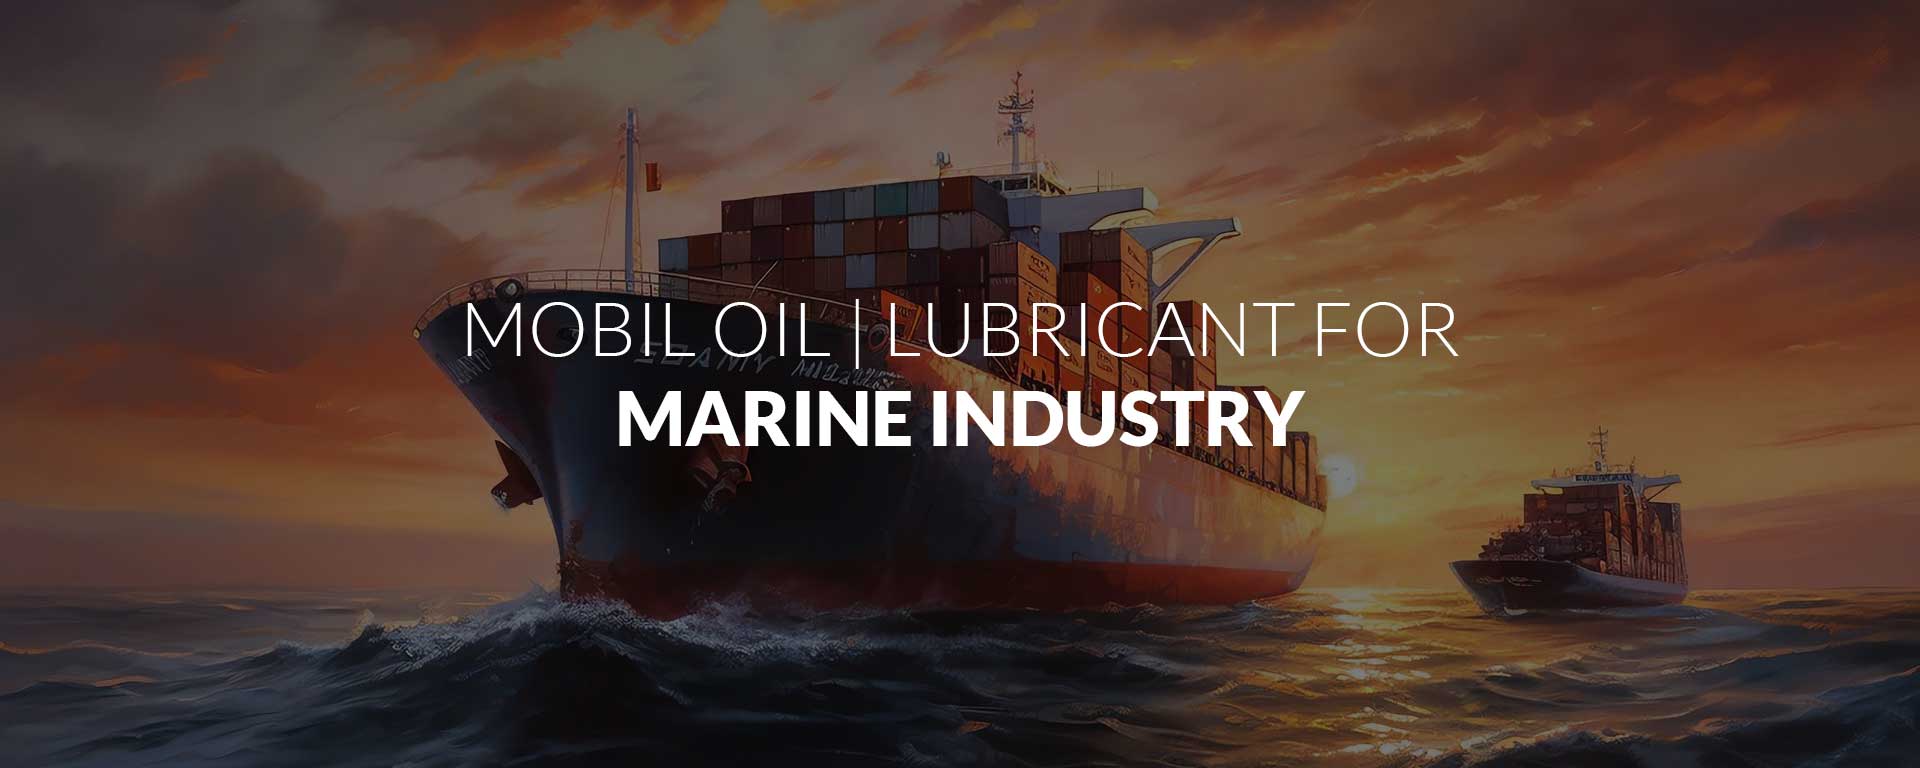 mobil-marine-industry-lubricant-and-oil-supplier-in-uae